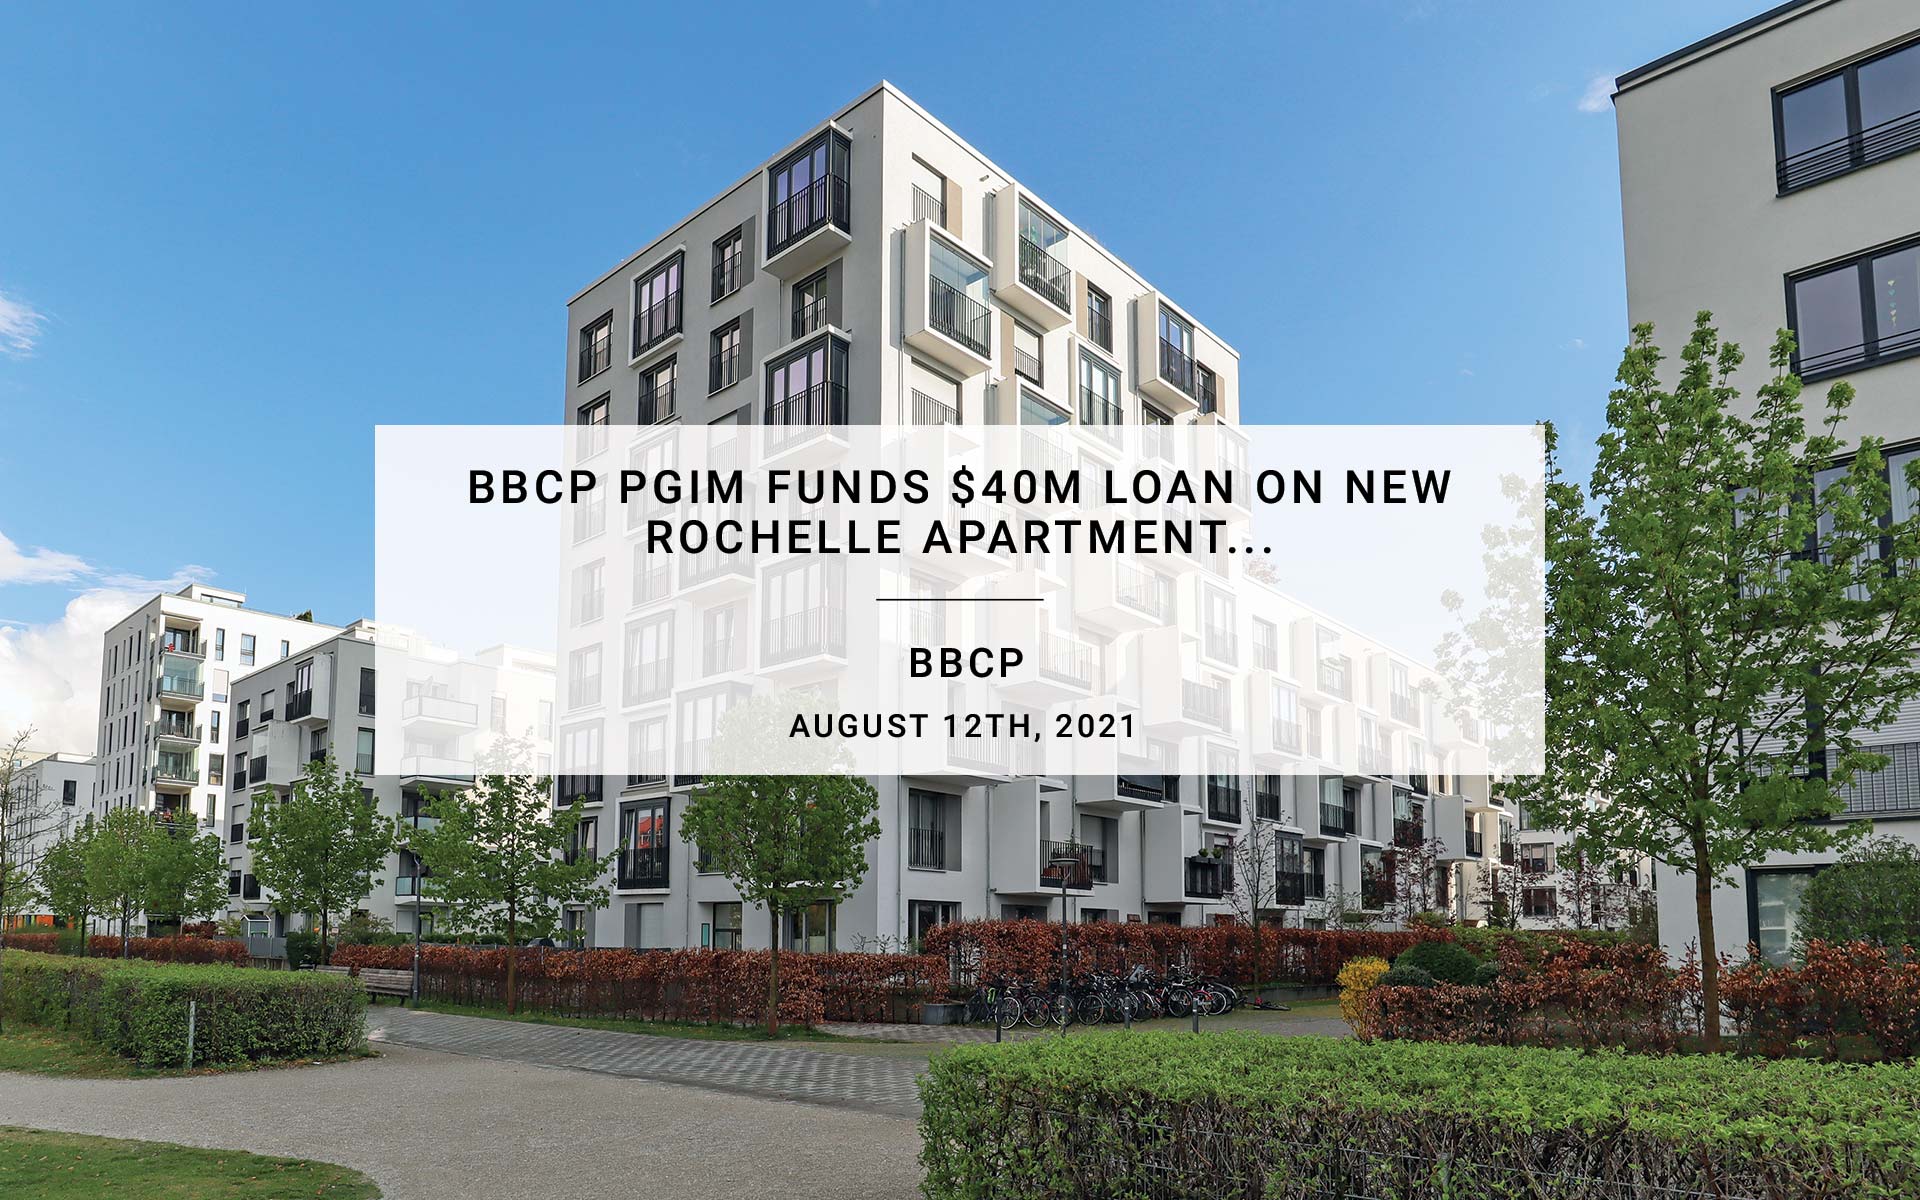 BBCP PGIM Funds $40m loan on new Rochelle Apartment | BBCP